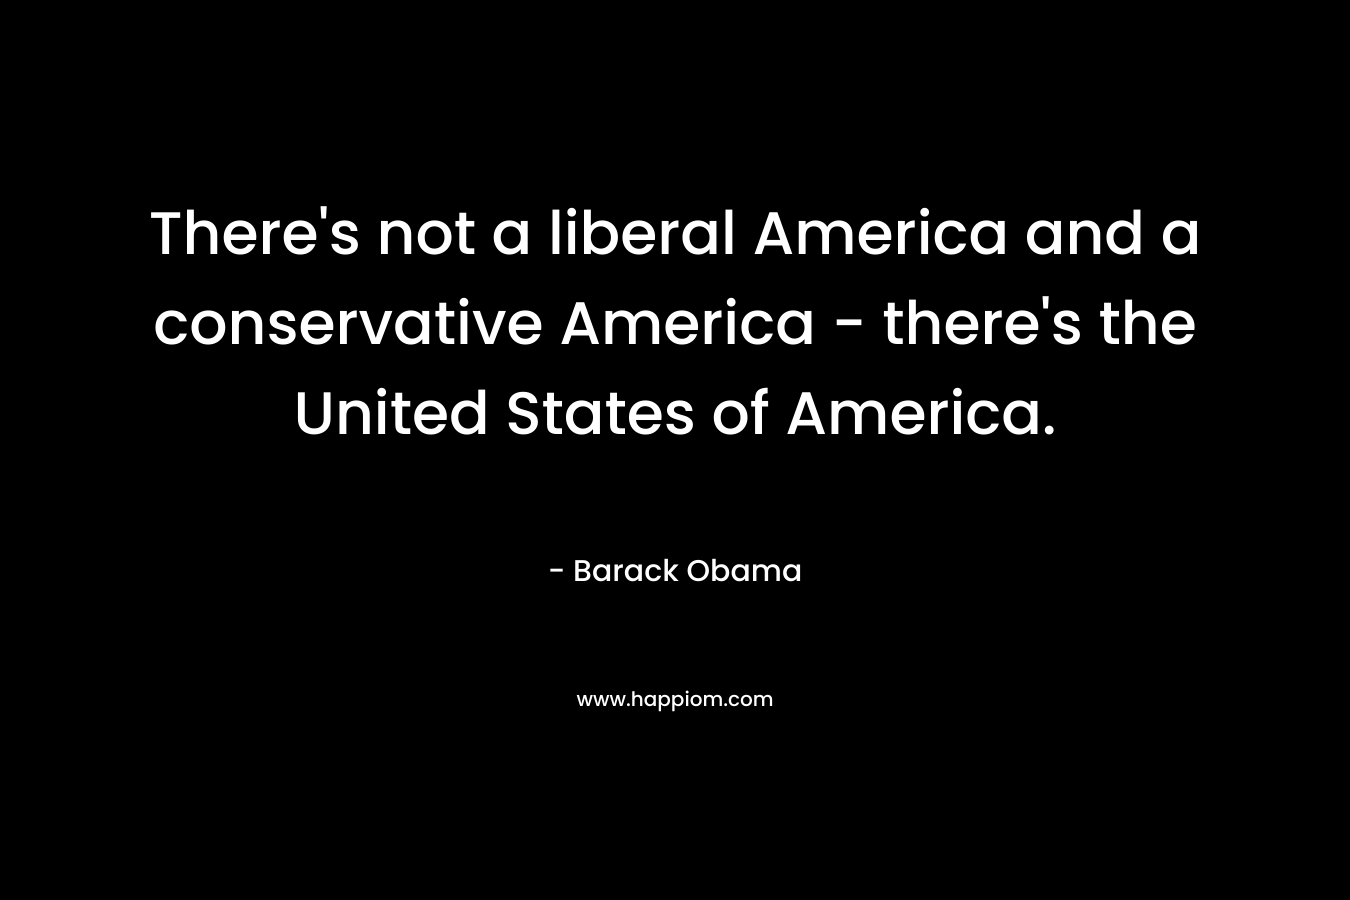 There's not a liberal America and a conservative America - there's the United States of America.